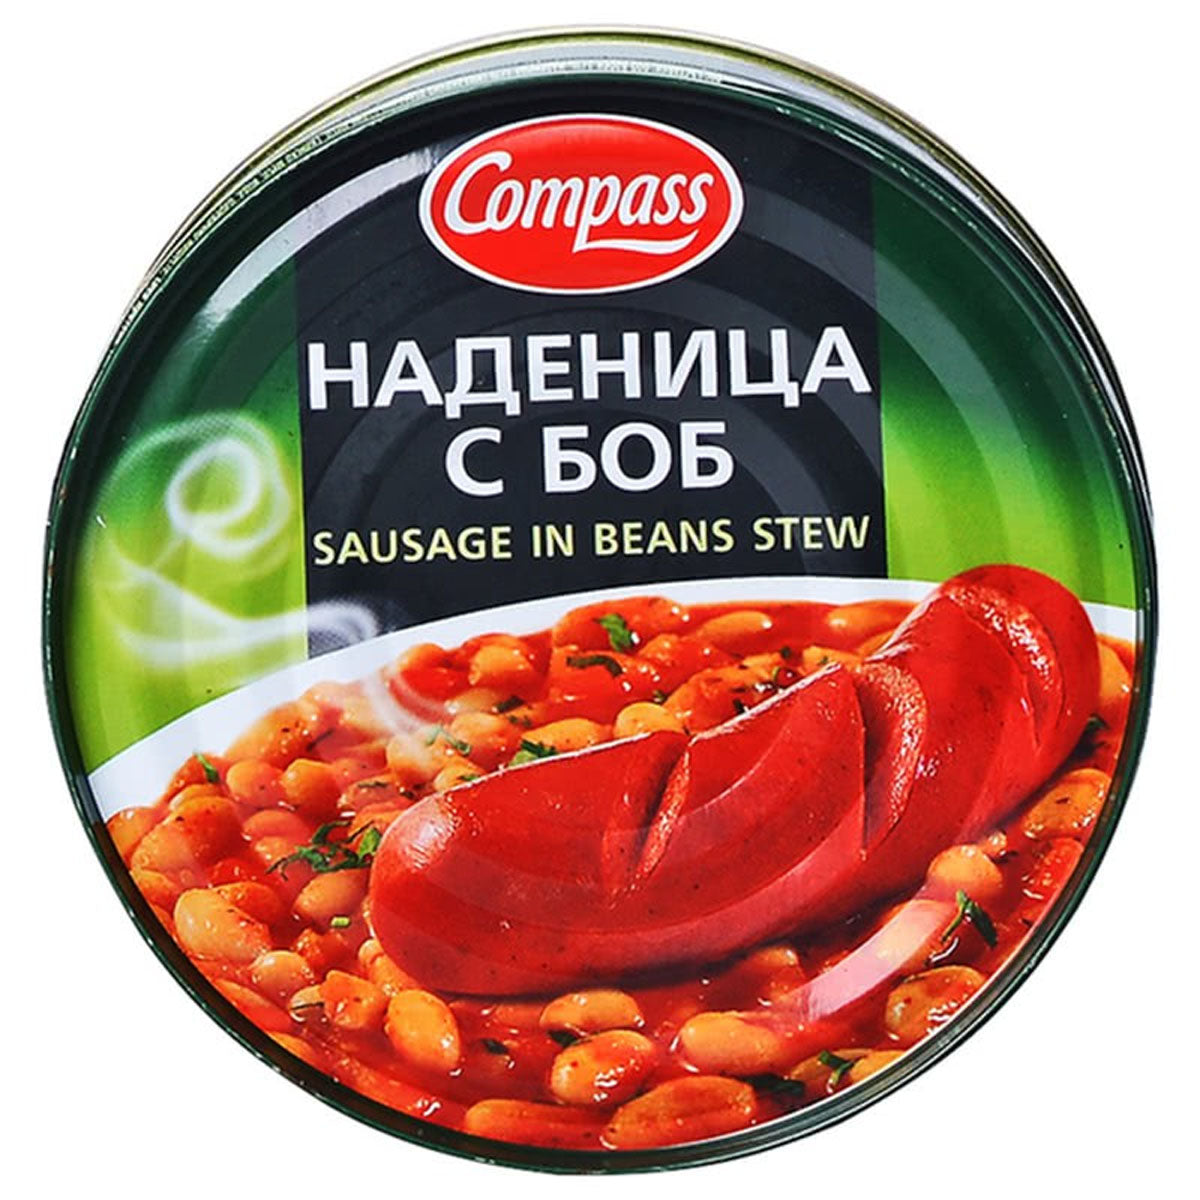 A tin of Compass - Sausage in Beans Stew - 300g.